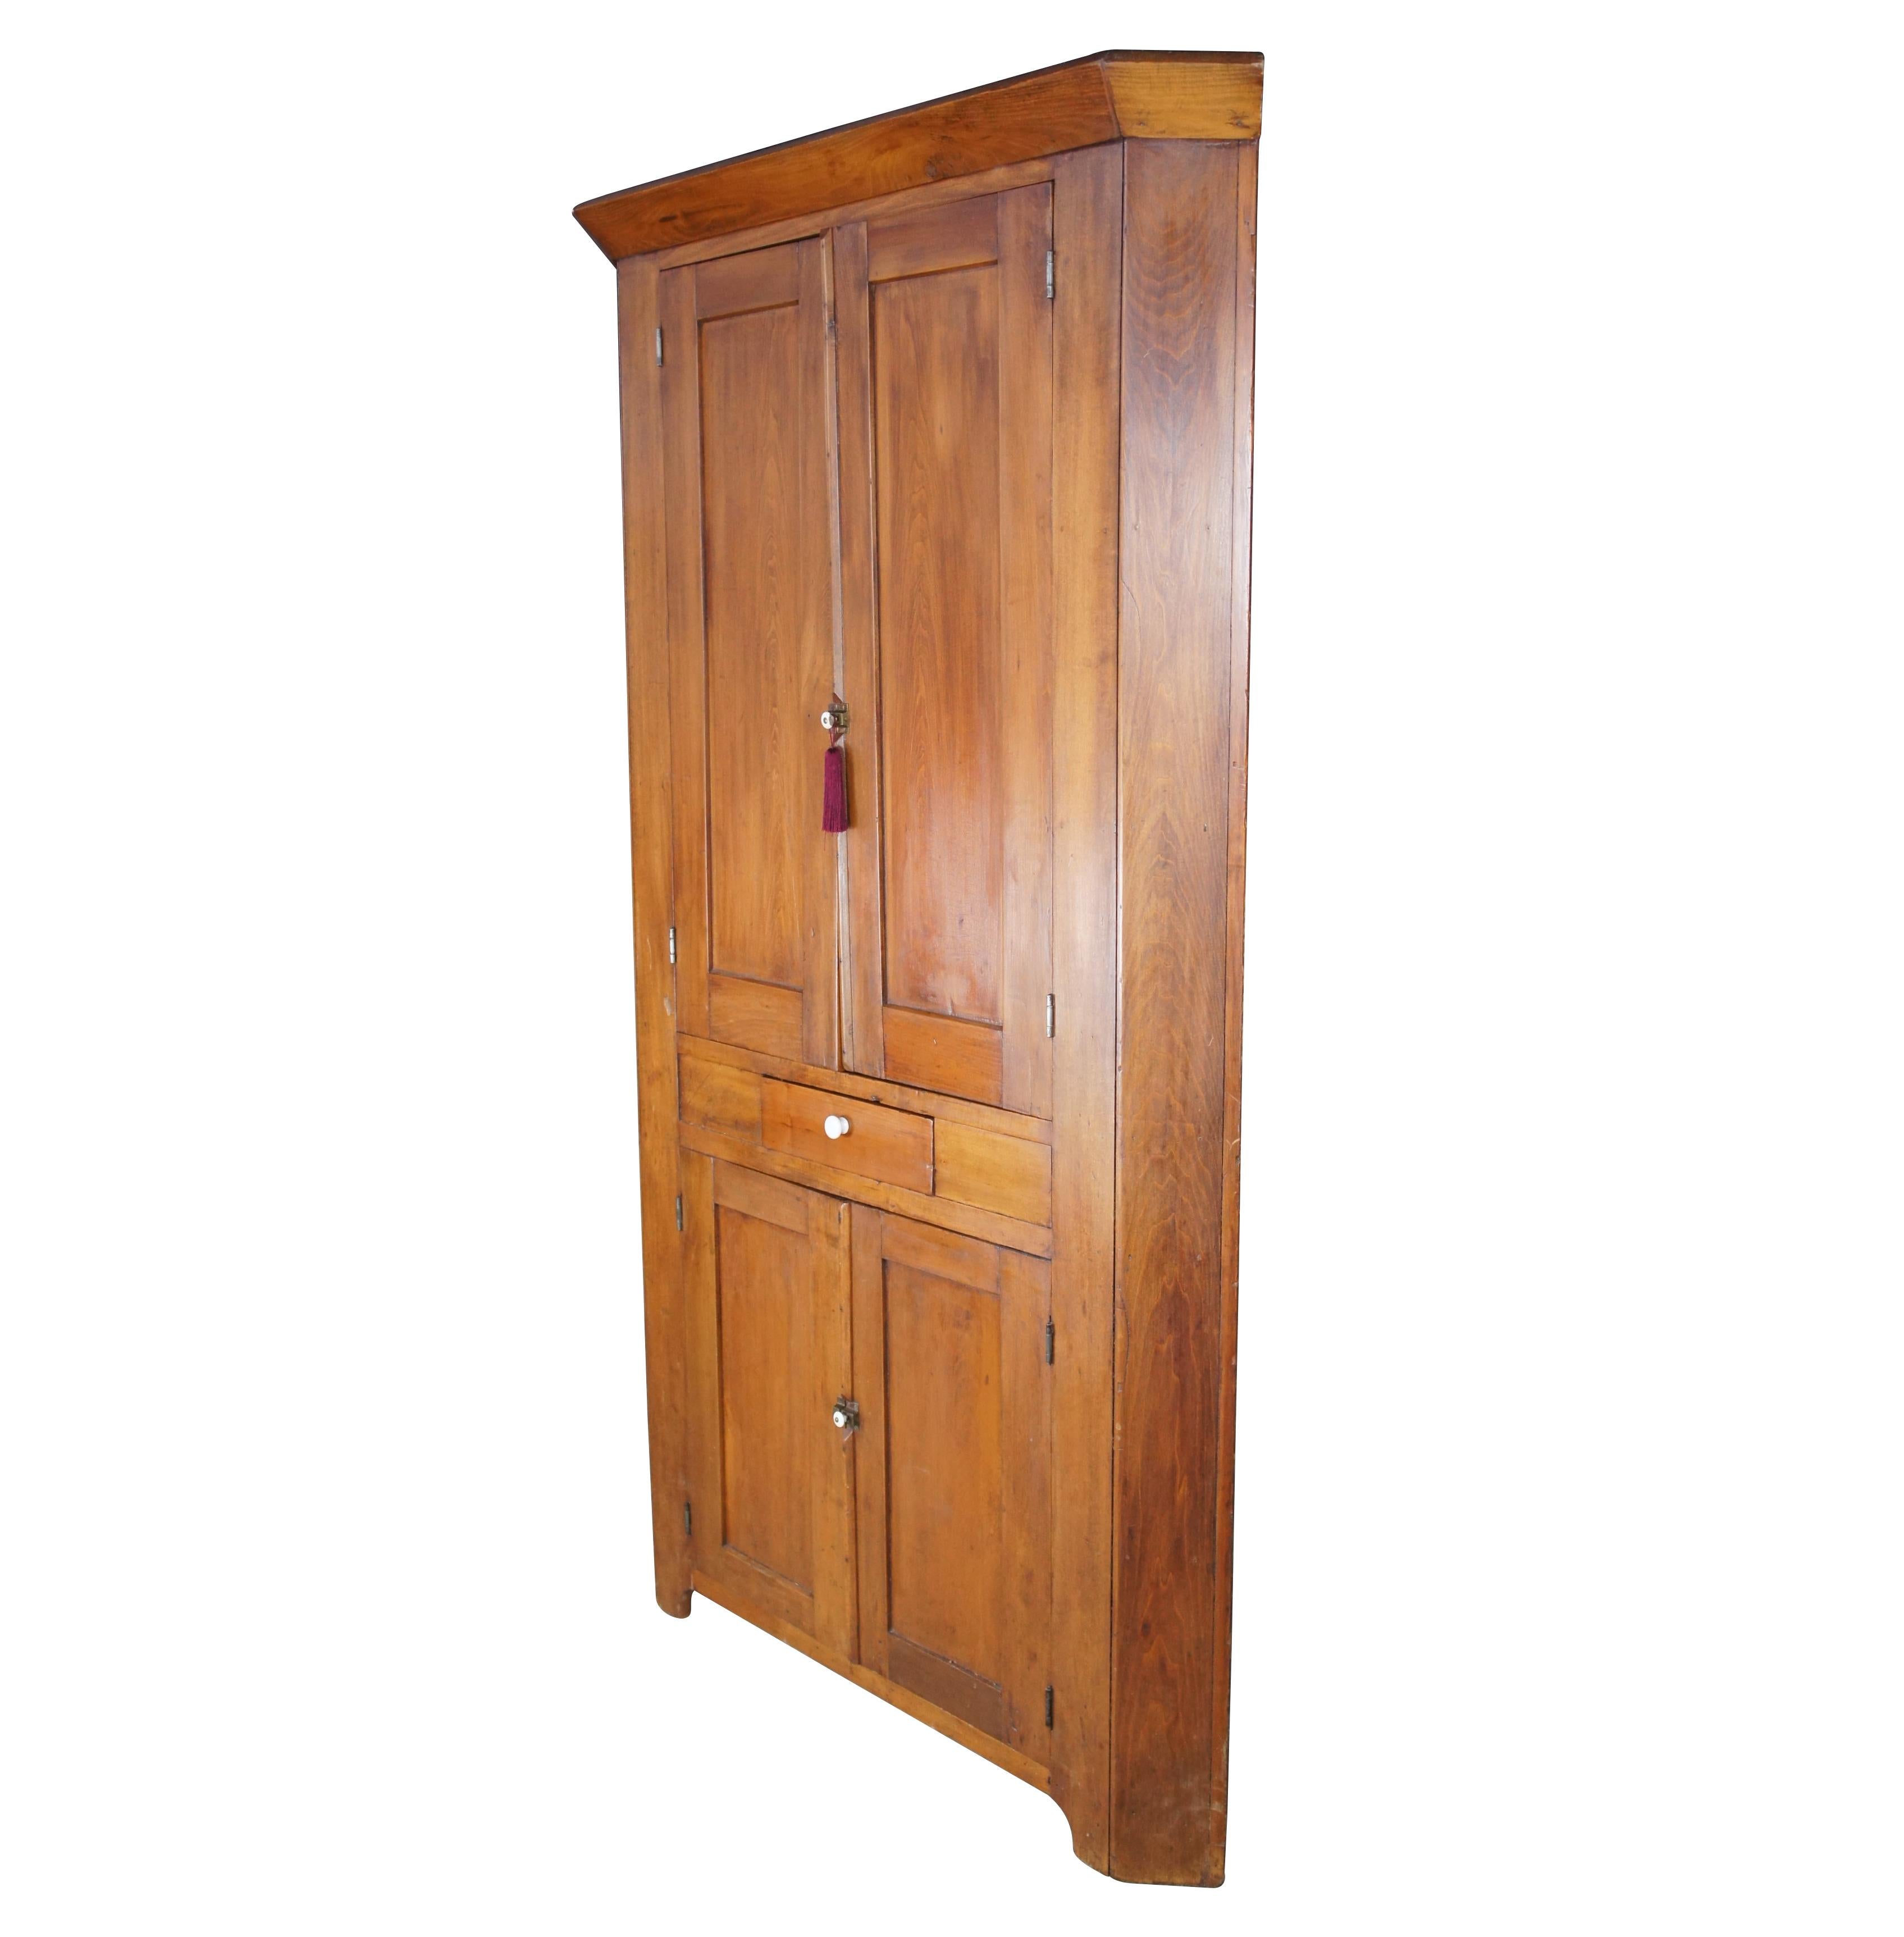 Primitive American corner cupboard, circa 1870s. Made from walnut and constructed using hand cut nails. Features a warm farmhouse patina with distressing from age. Hardware is iron and porcelain.

Measures: 51